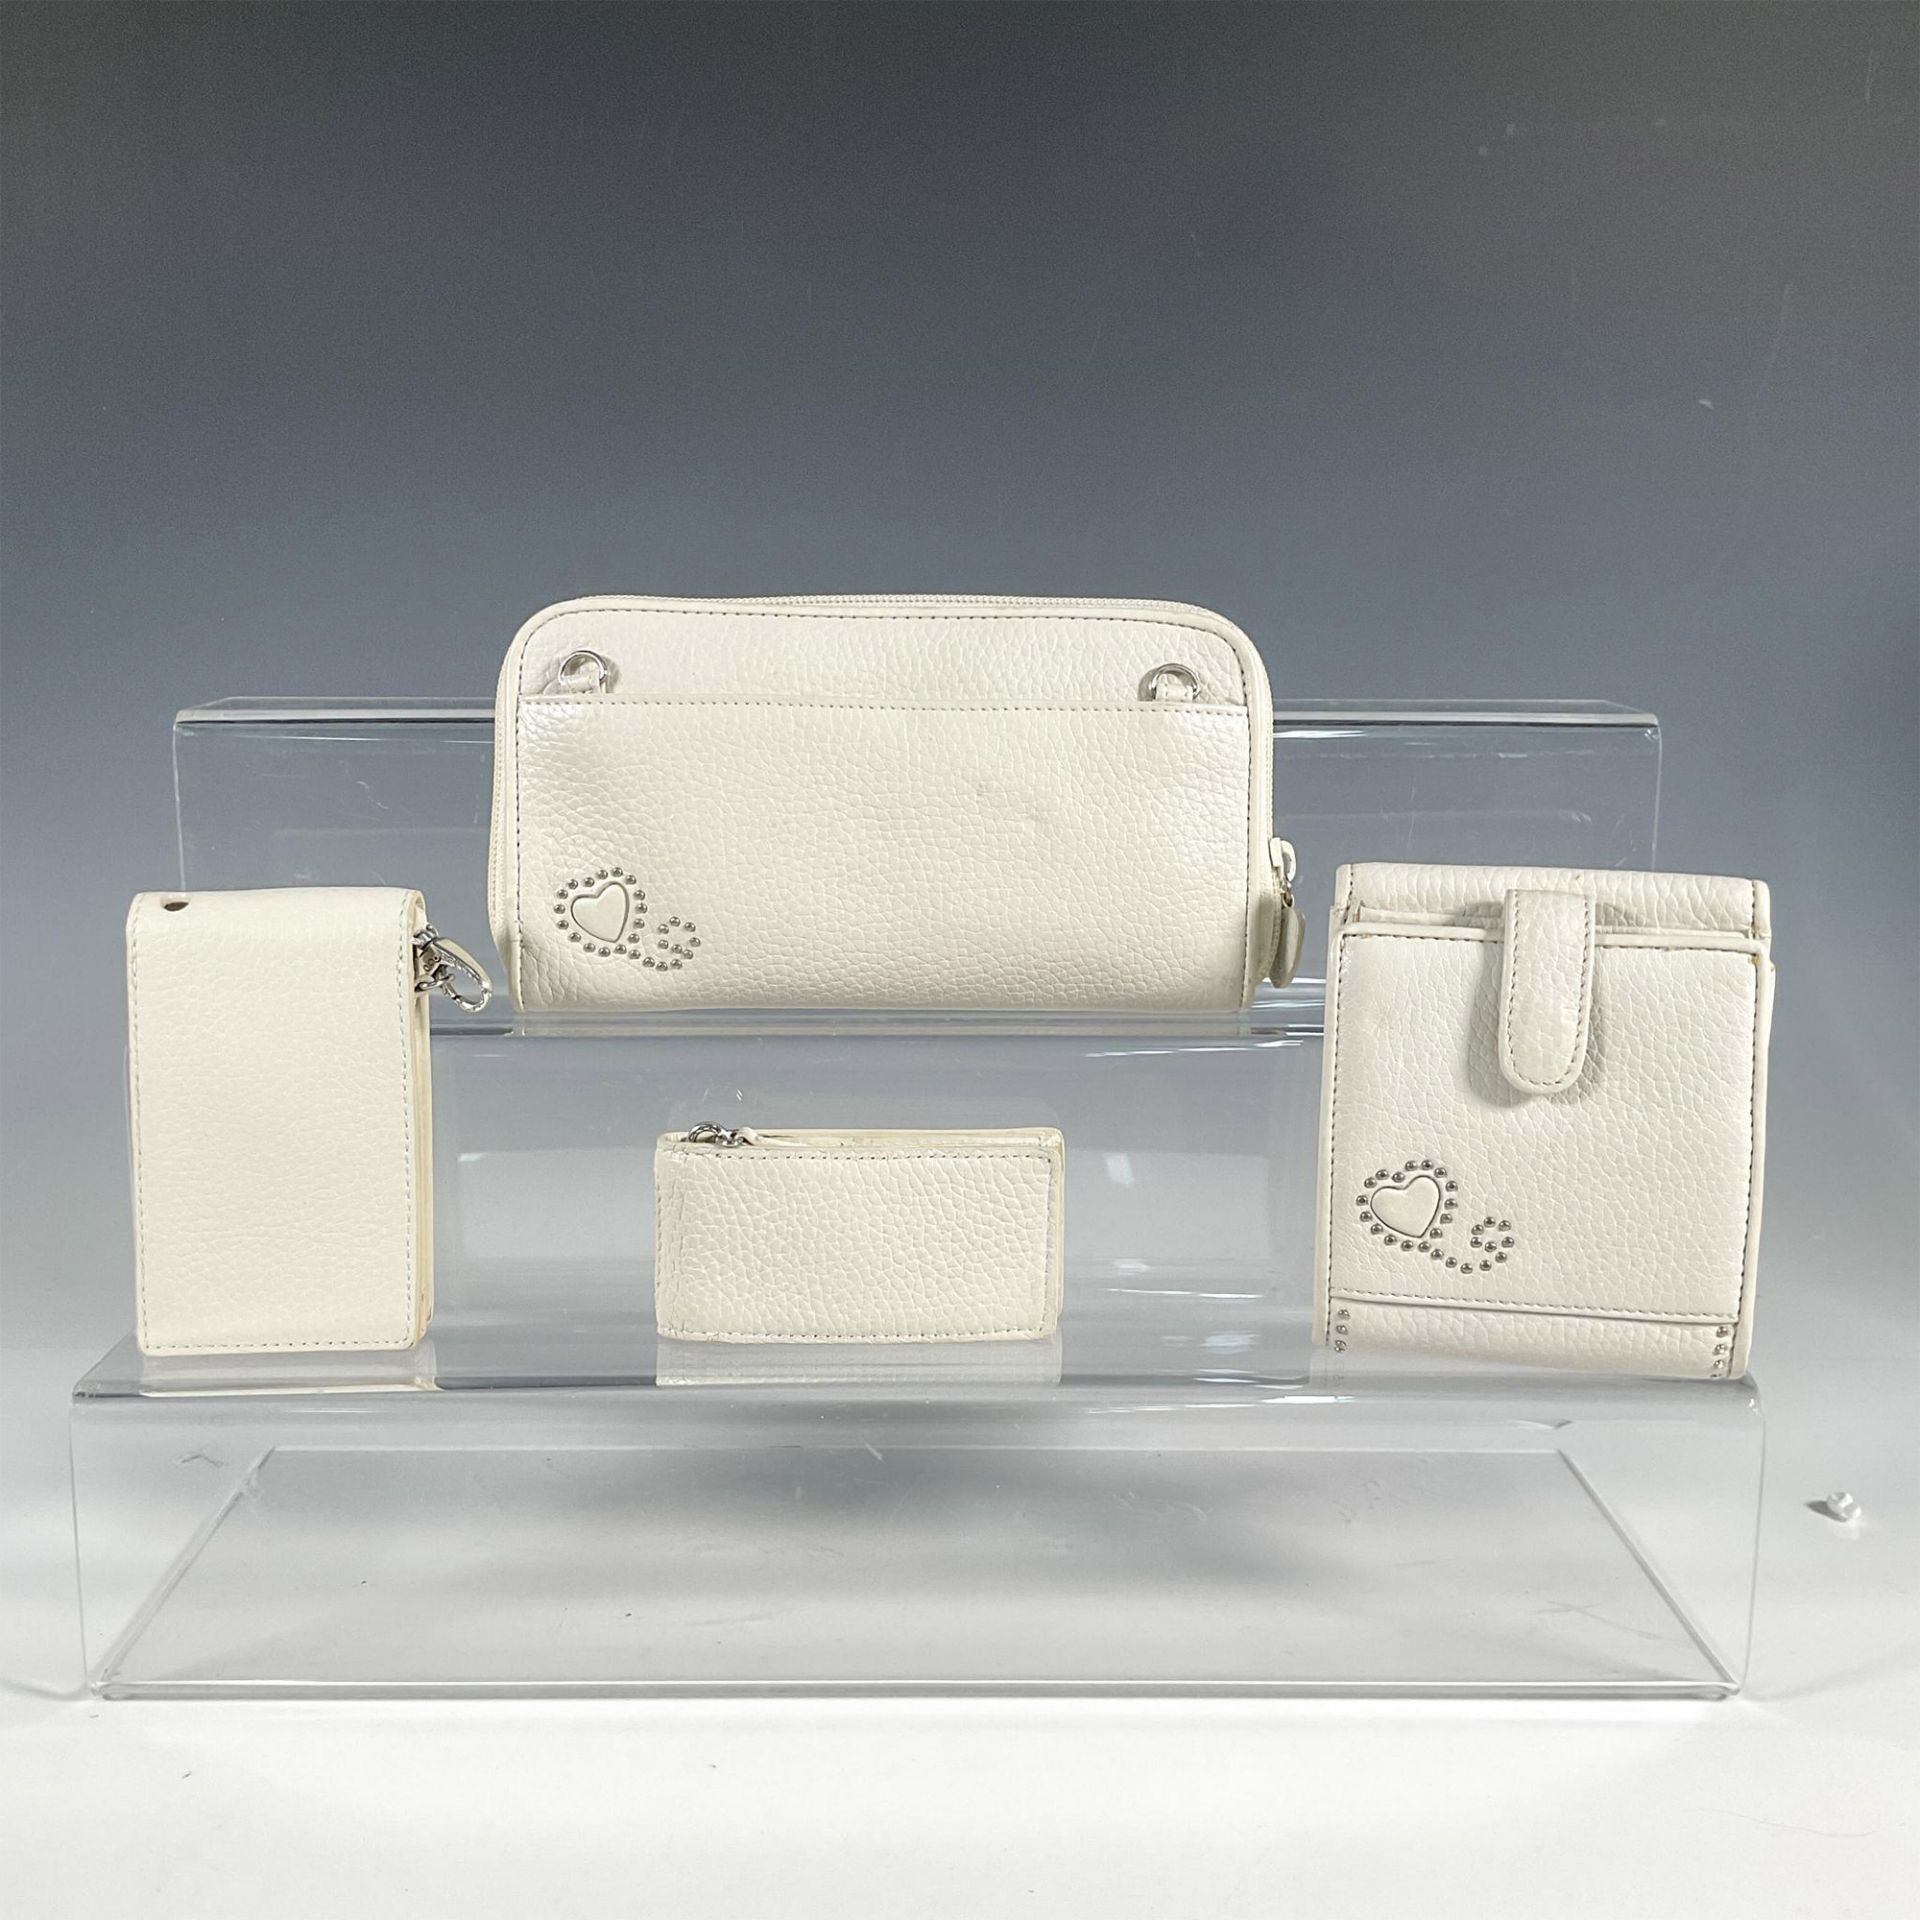 4pc Brighton Leather Wallets and iPod cases, Light Khaki - Image 2 of 2